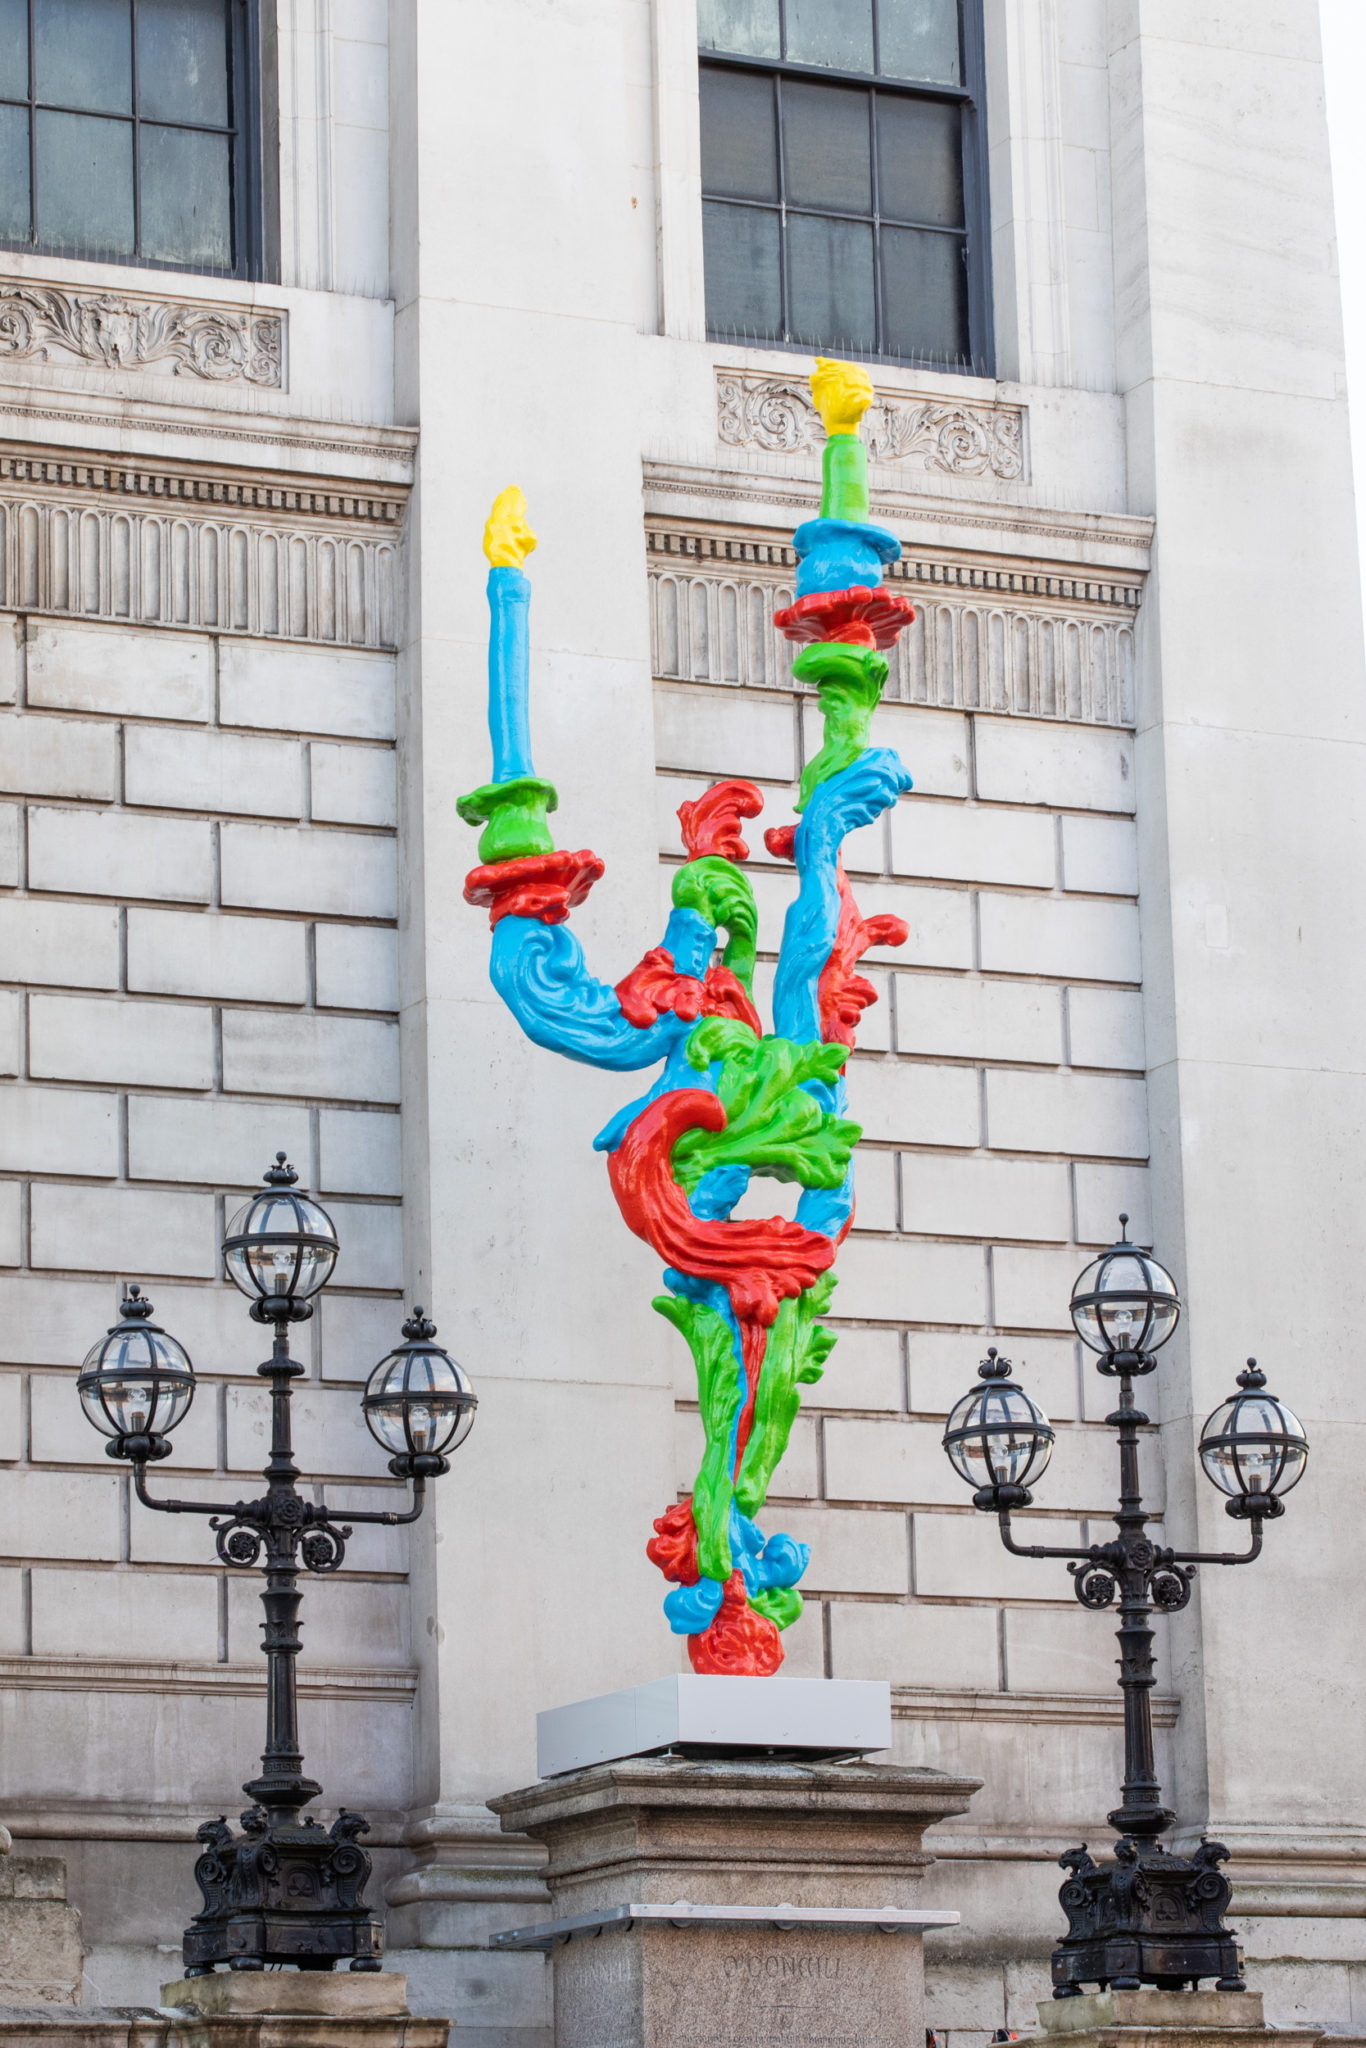 The ‘RGB Sconce, Hold Your Nose’ statue outside City Hall, 29-09-2021. Image: Naoise Culhane.